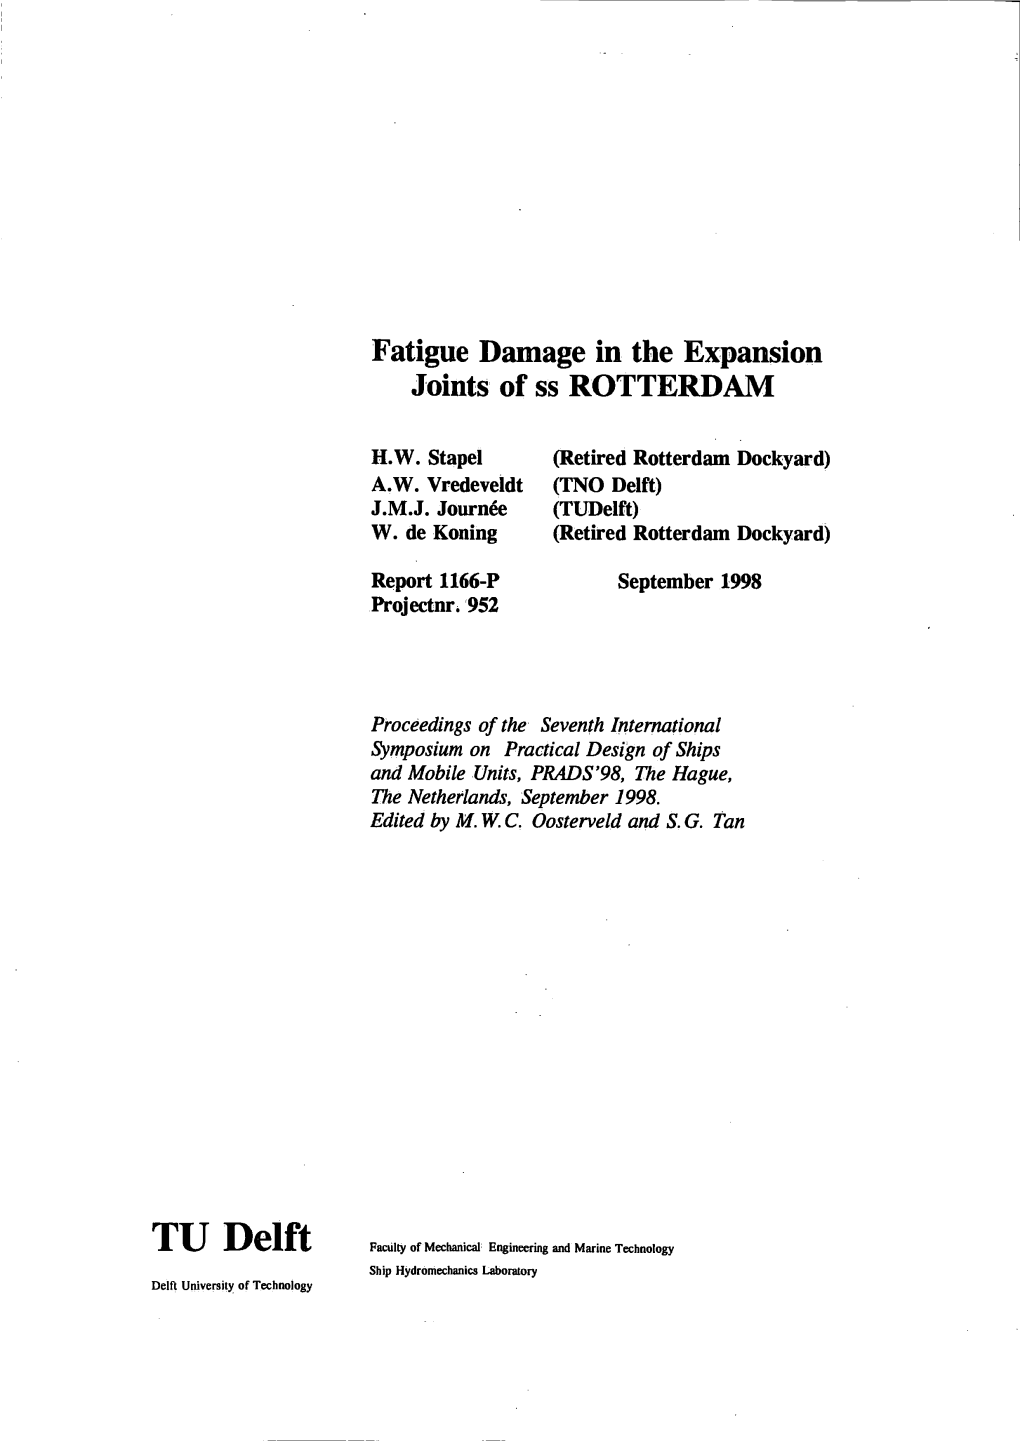 Fatigue Damage in the Expansion Joints of Ss ROTTERDAM